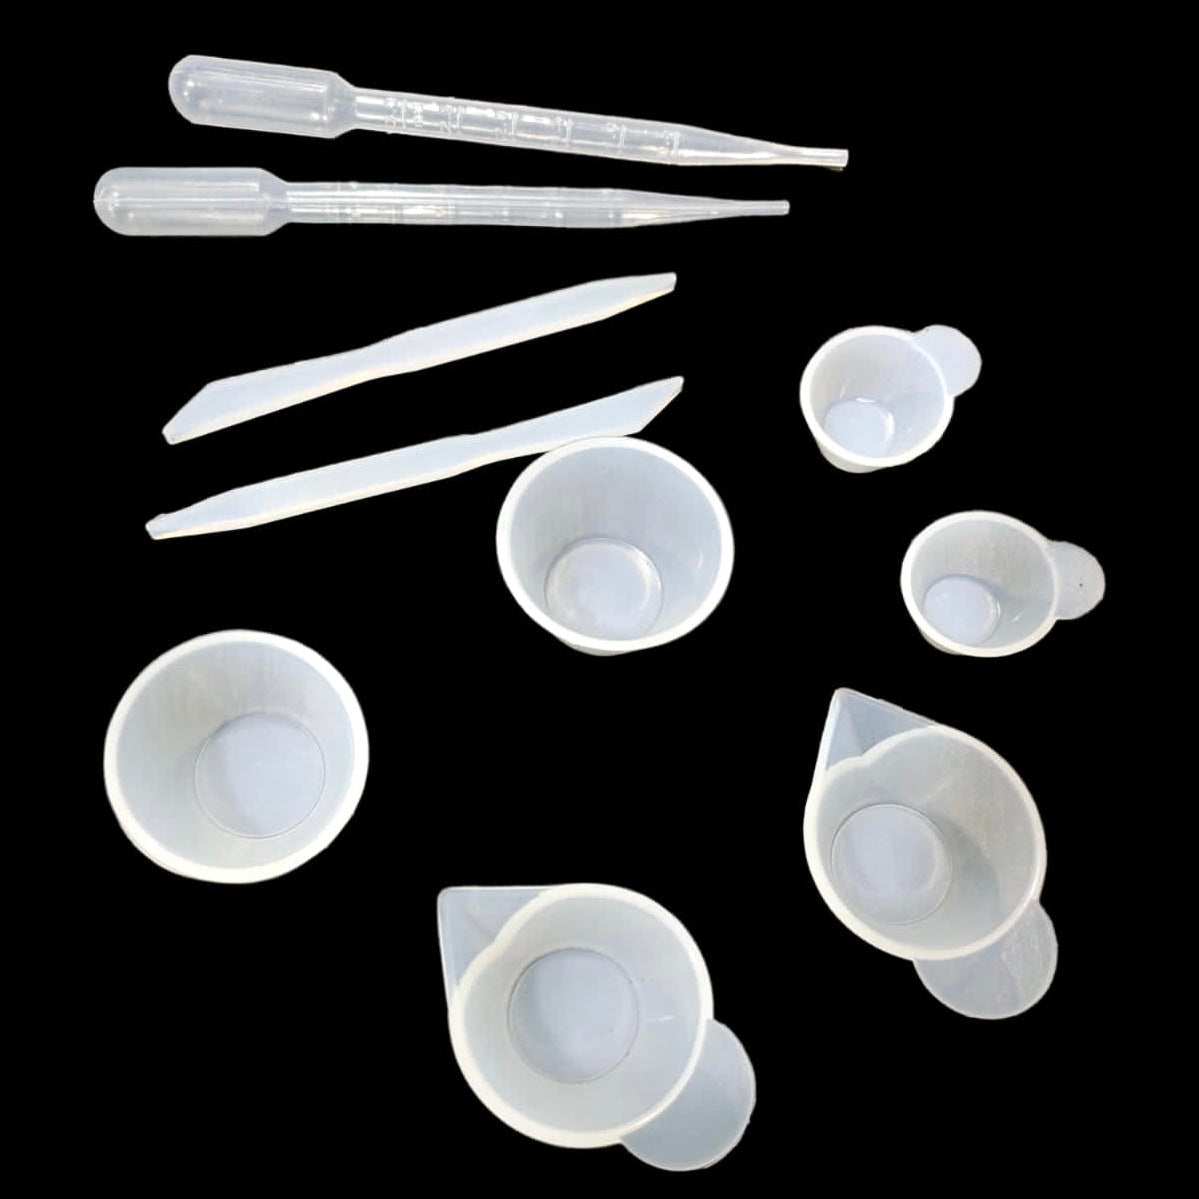 Small silicon mixing cup pack of 10